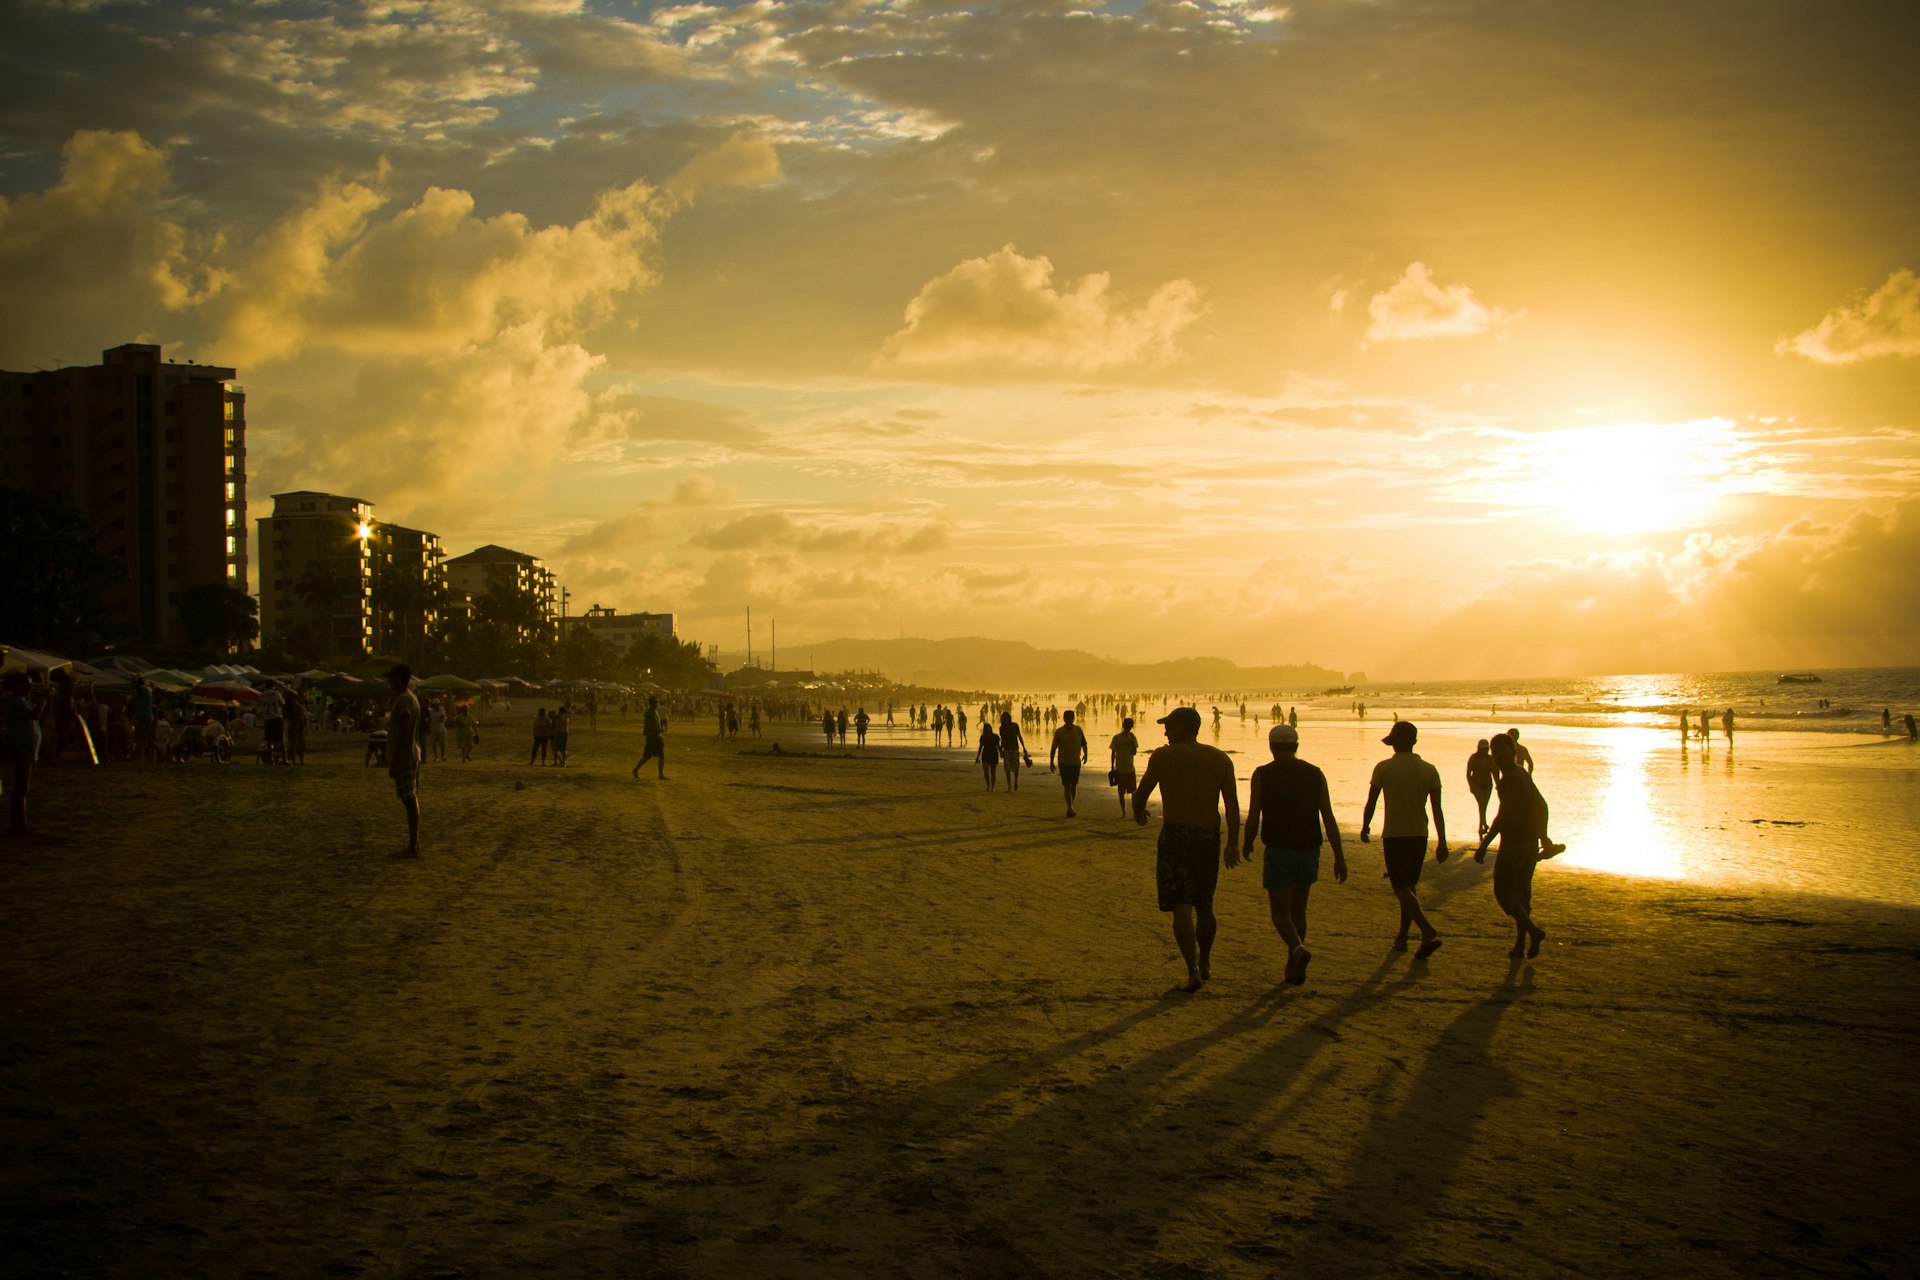 Groups of people in silhouette walking on a beach as the sun sets in the sky